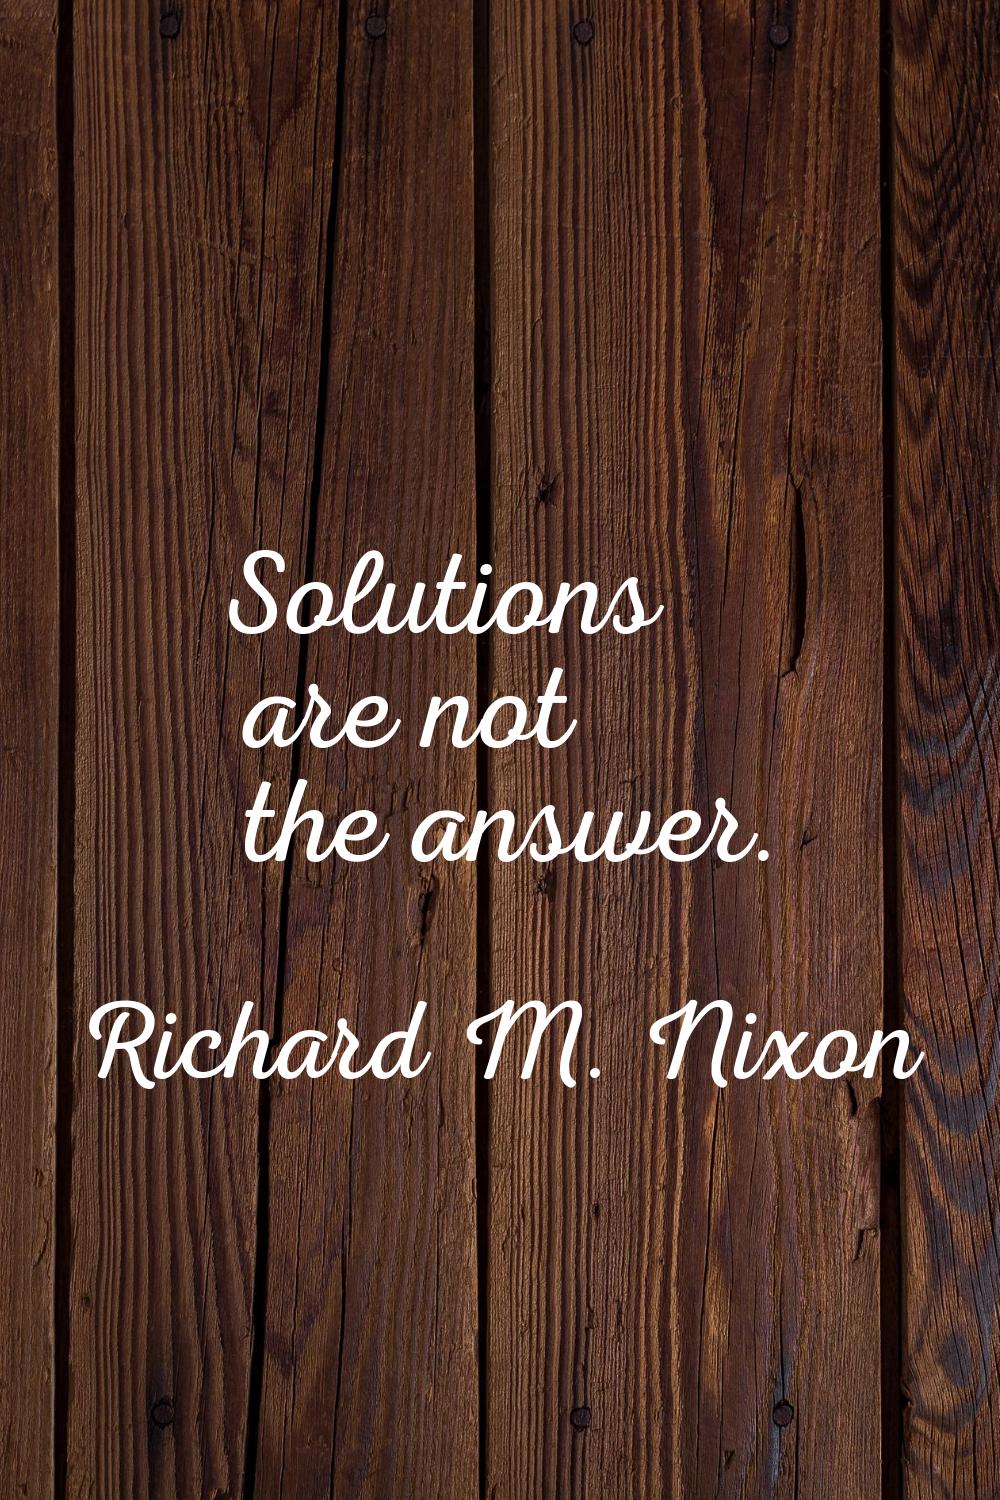 Solutions are not the answer.